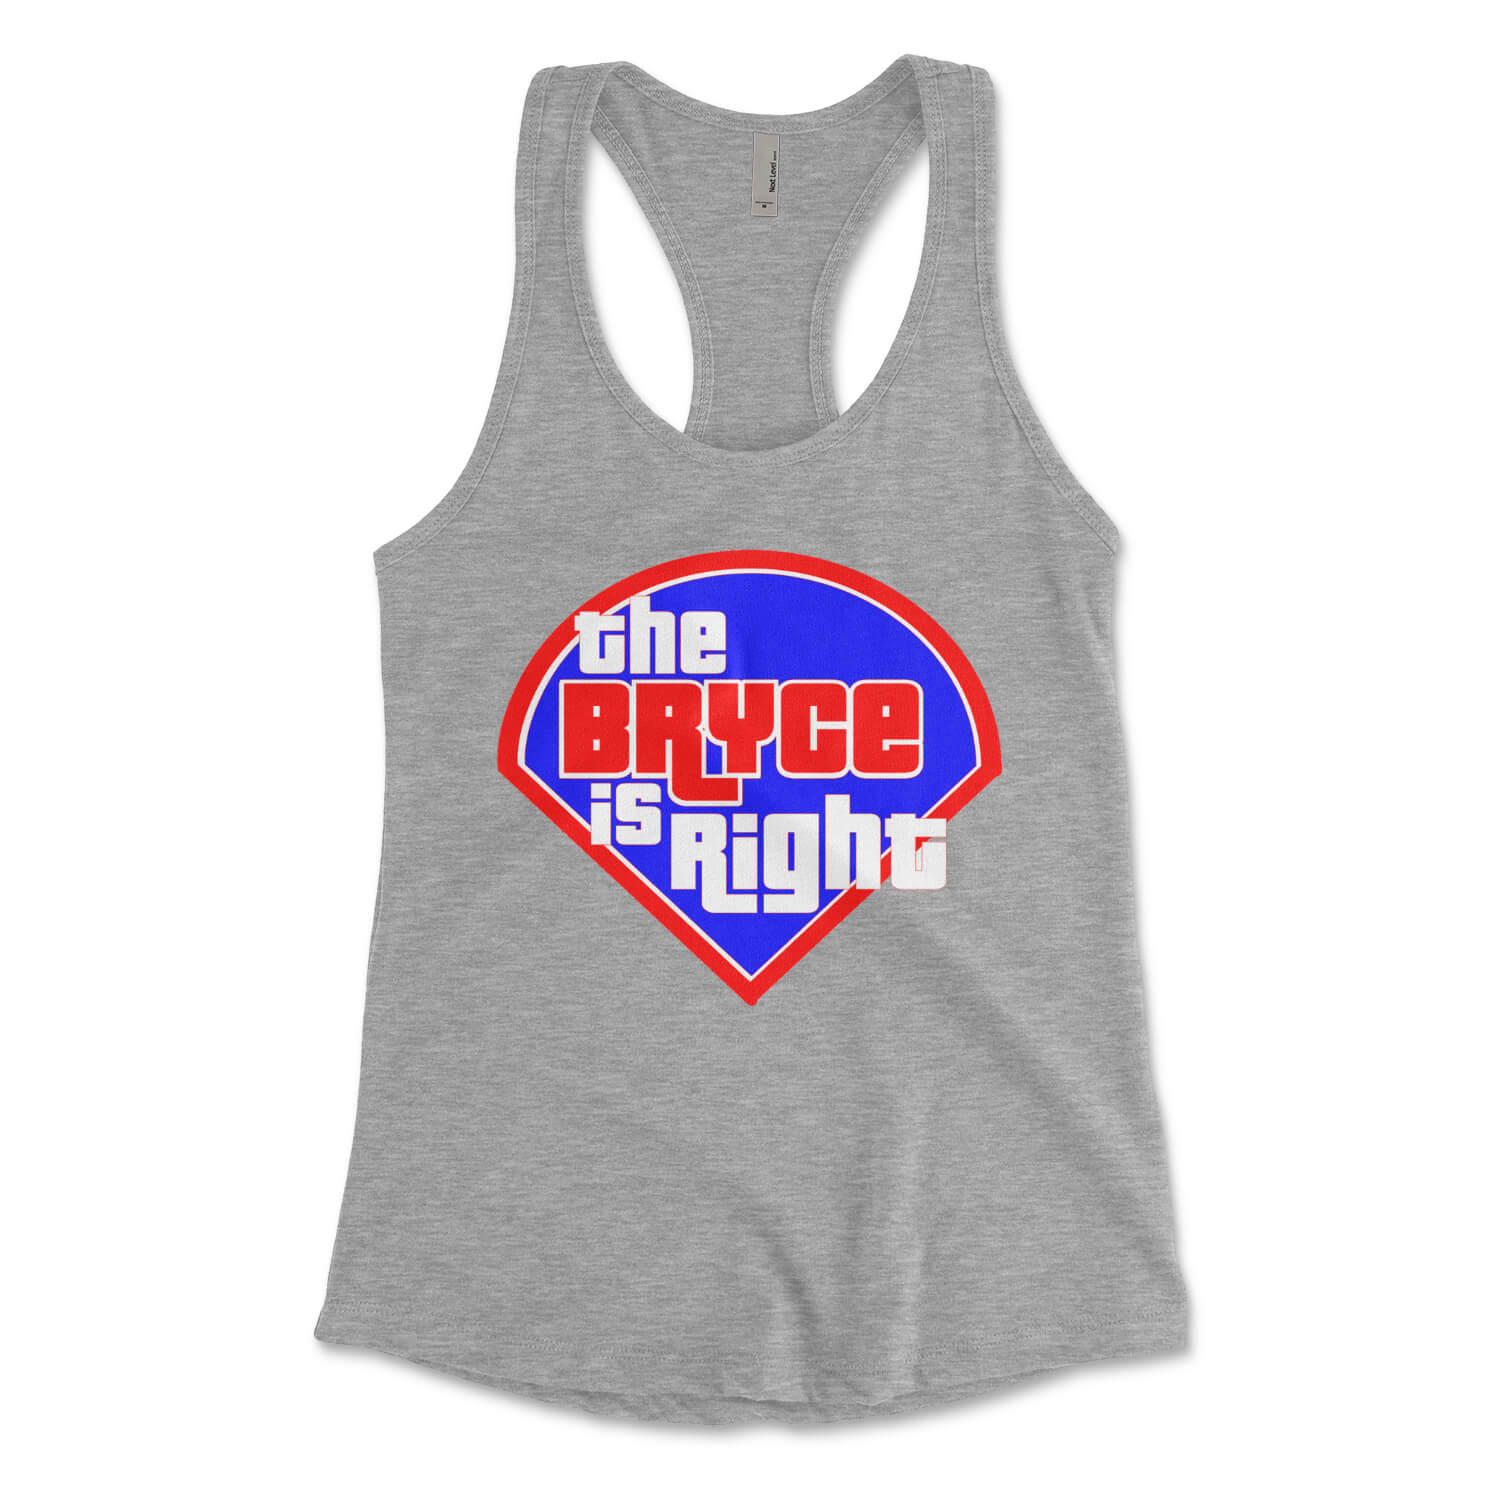 Philadelphia Phillies Bryce Harper the Bryce Is Right womens heather grey racerback tank top from Phillygoat